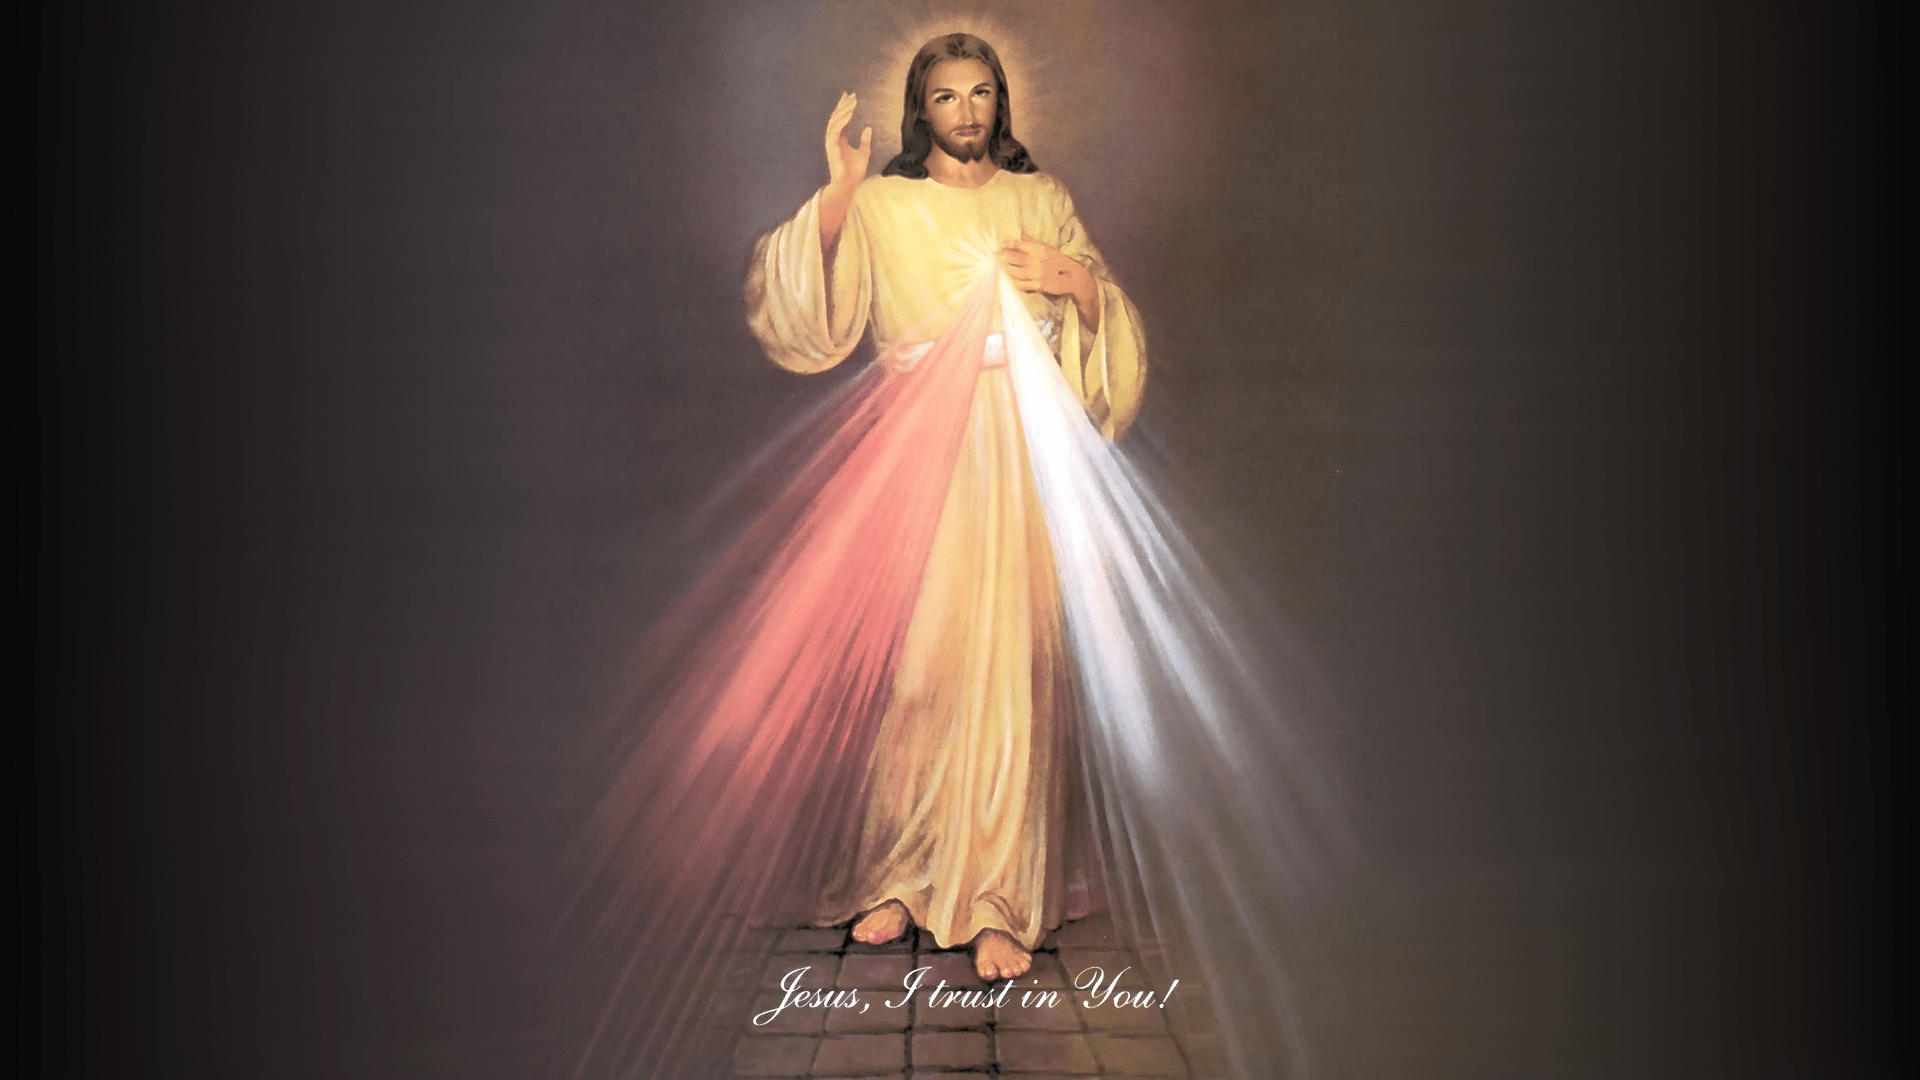 Download the Skemp Divine Mercy Image Wallpaper | The Divine Mercy